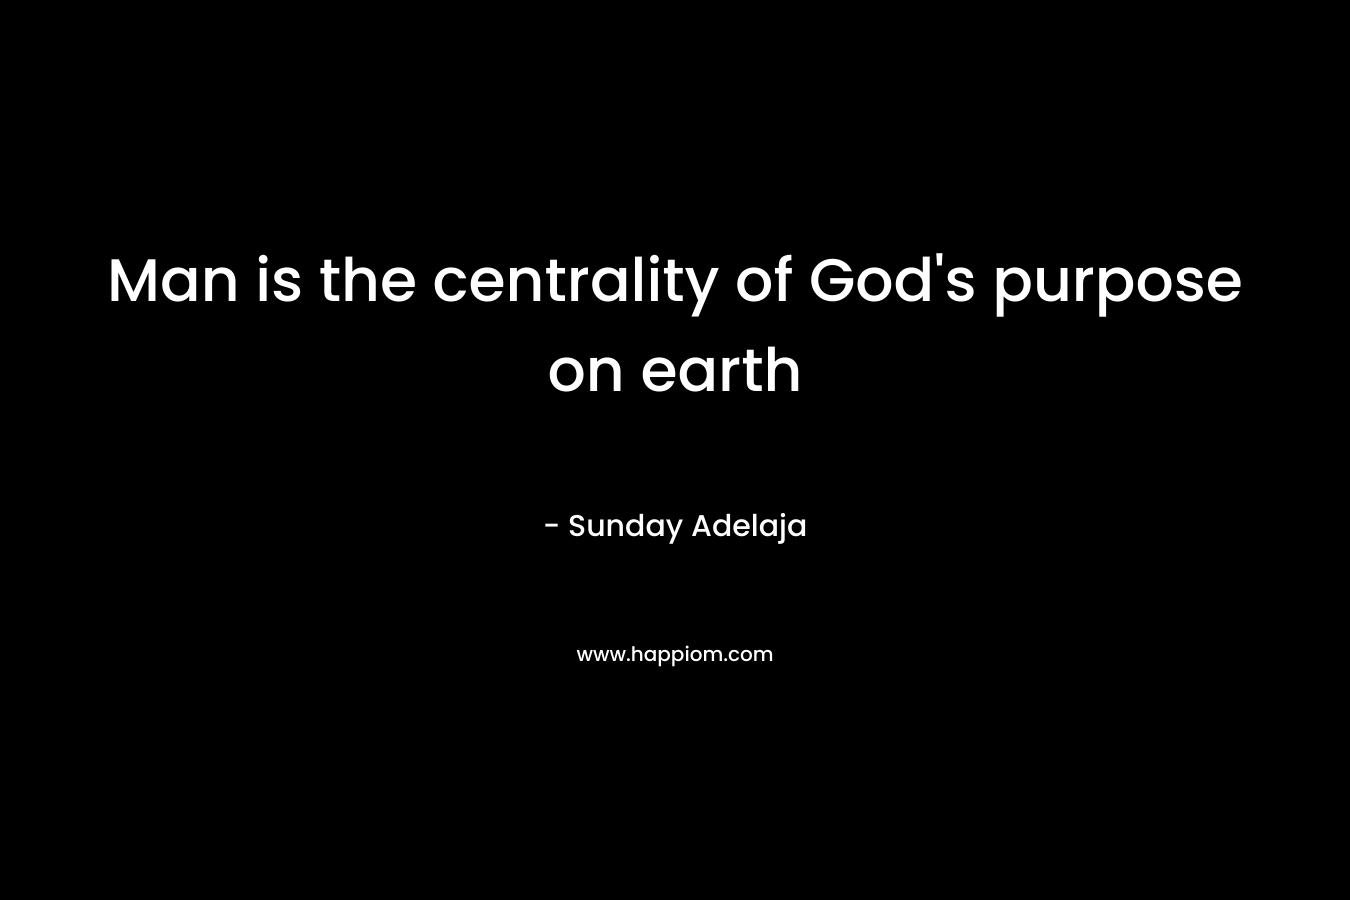 Man is the centrality of God's purpose on earth